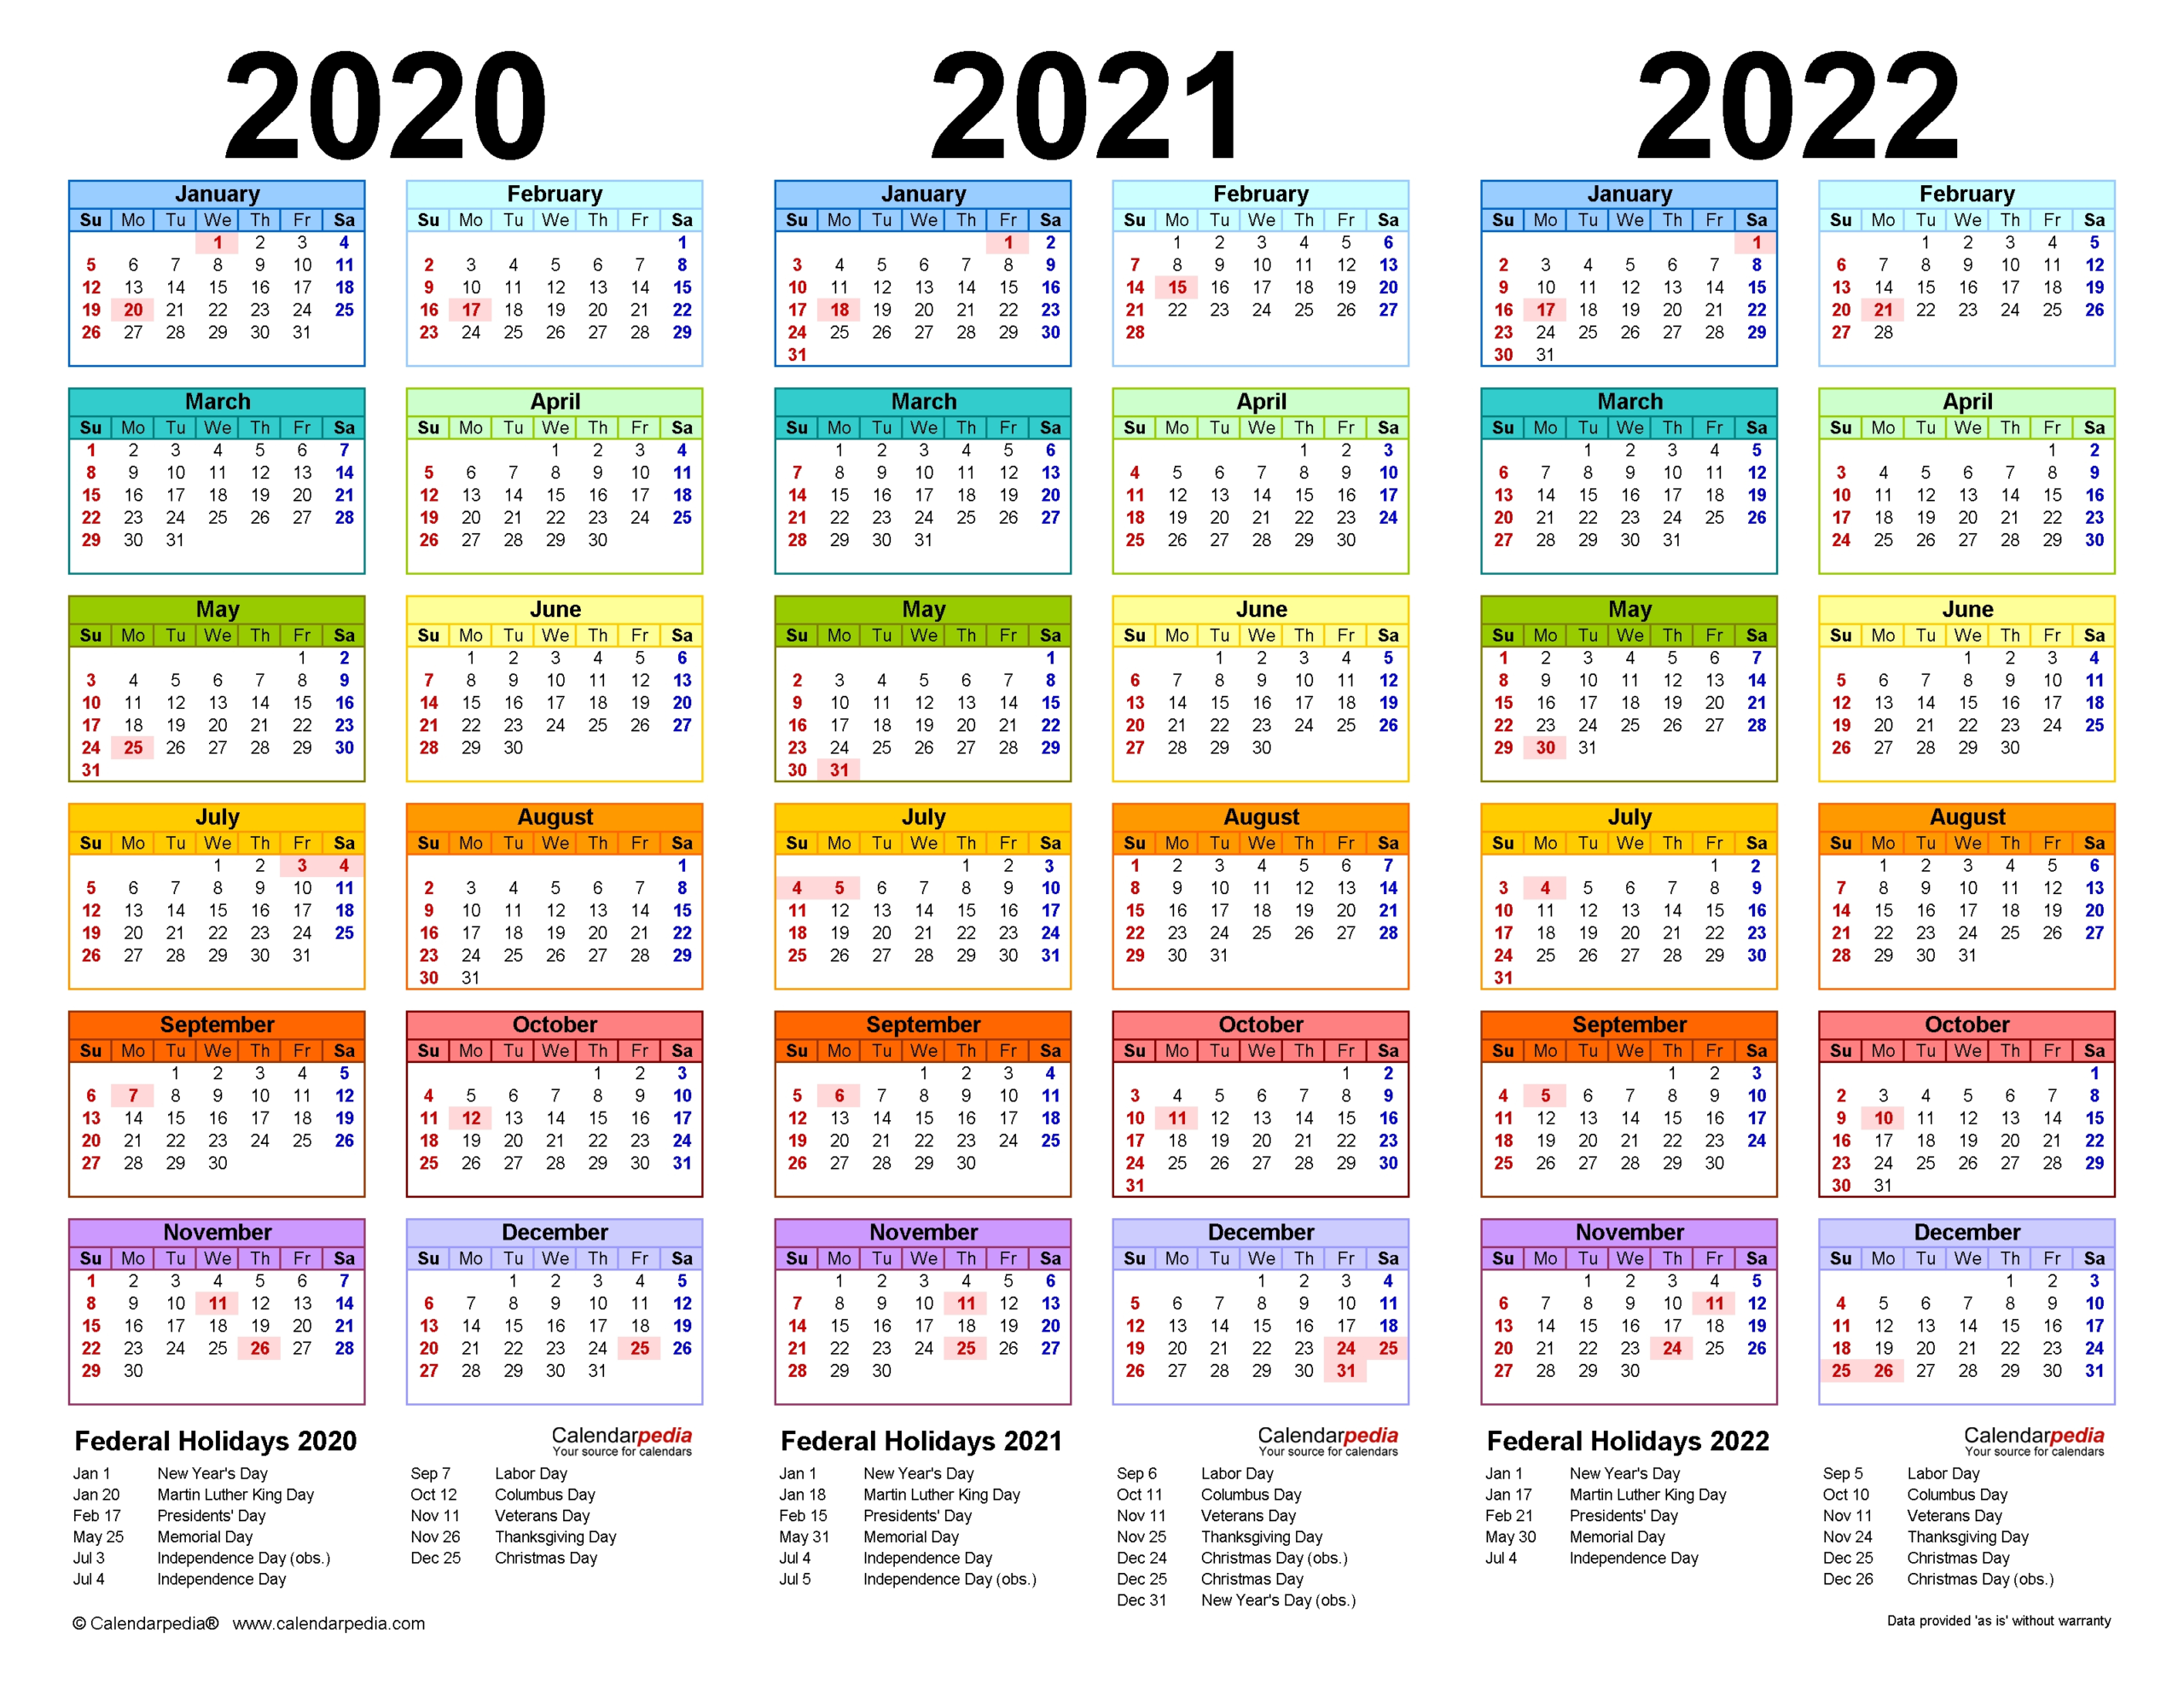 2022 Calendar Printable One Page  2022 Yearly Calendar  Scott Hiplent pertaining to Printable 2022 Calendar One Page